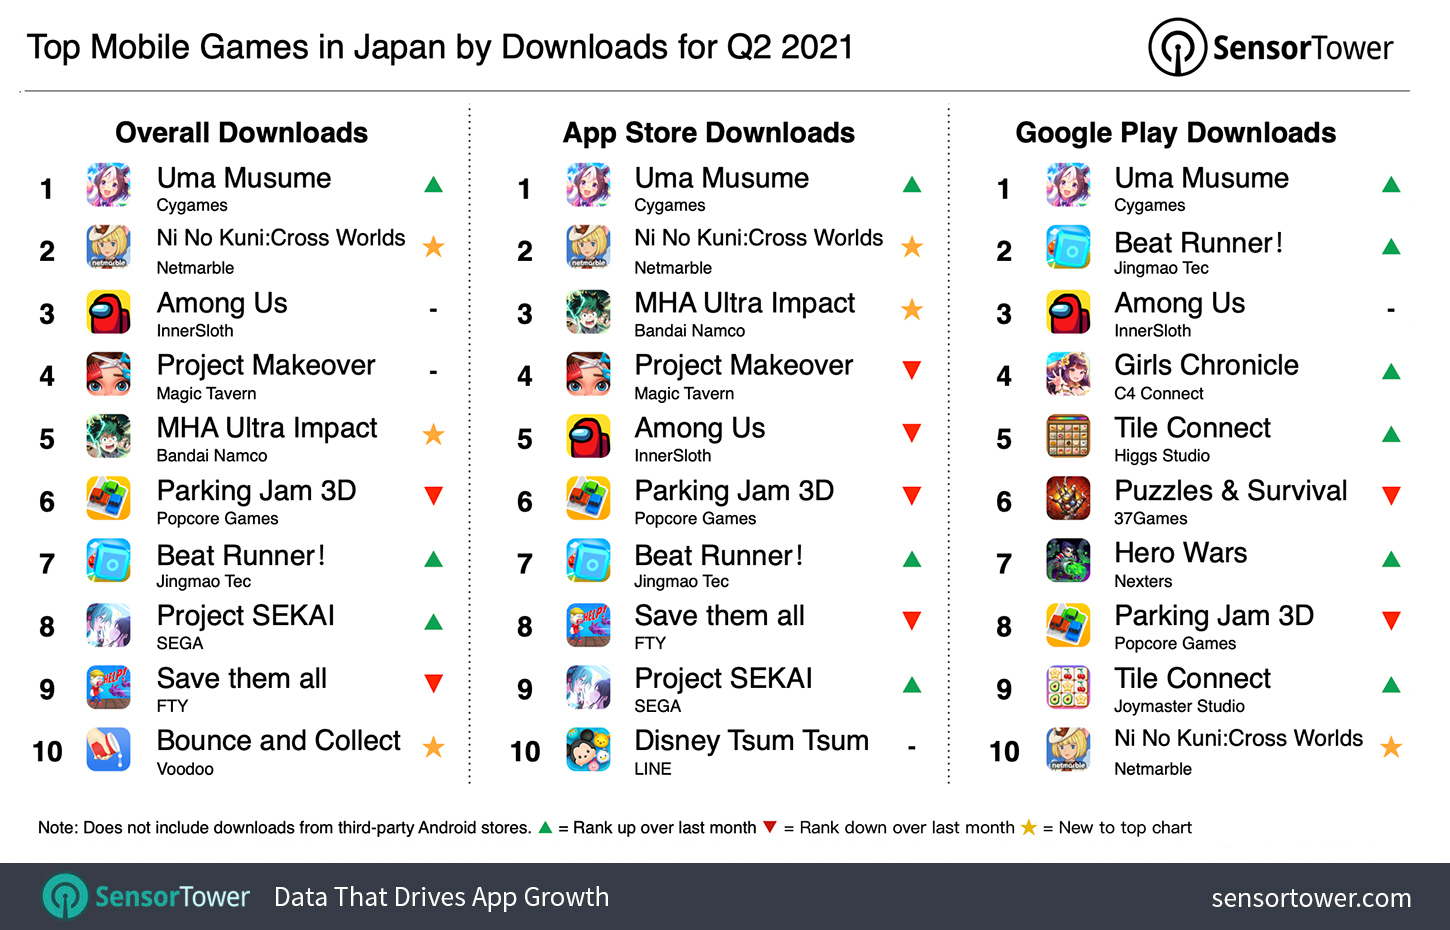 Top Mobile Games Worldwide for August 2022 by Downloads